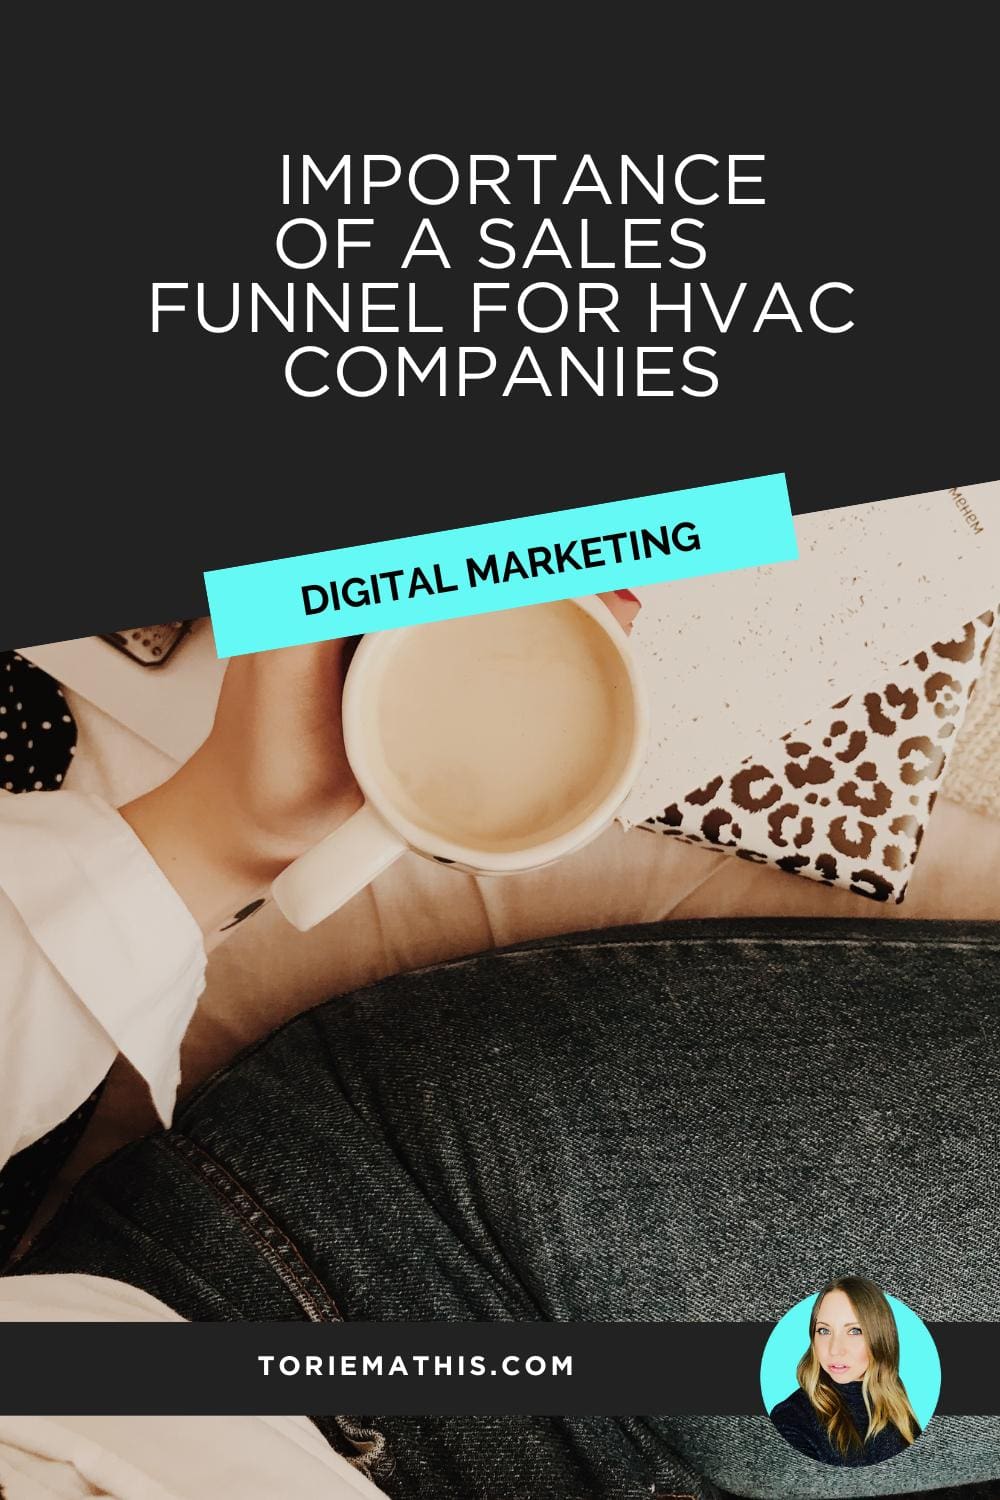 Utilizing a Sales Funnel to Fill an HVAC Company's Calendar Year-Round